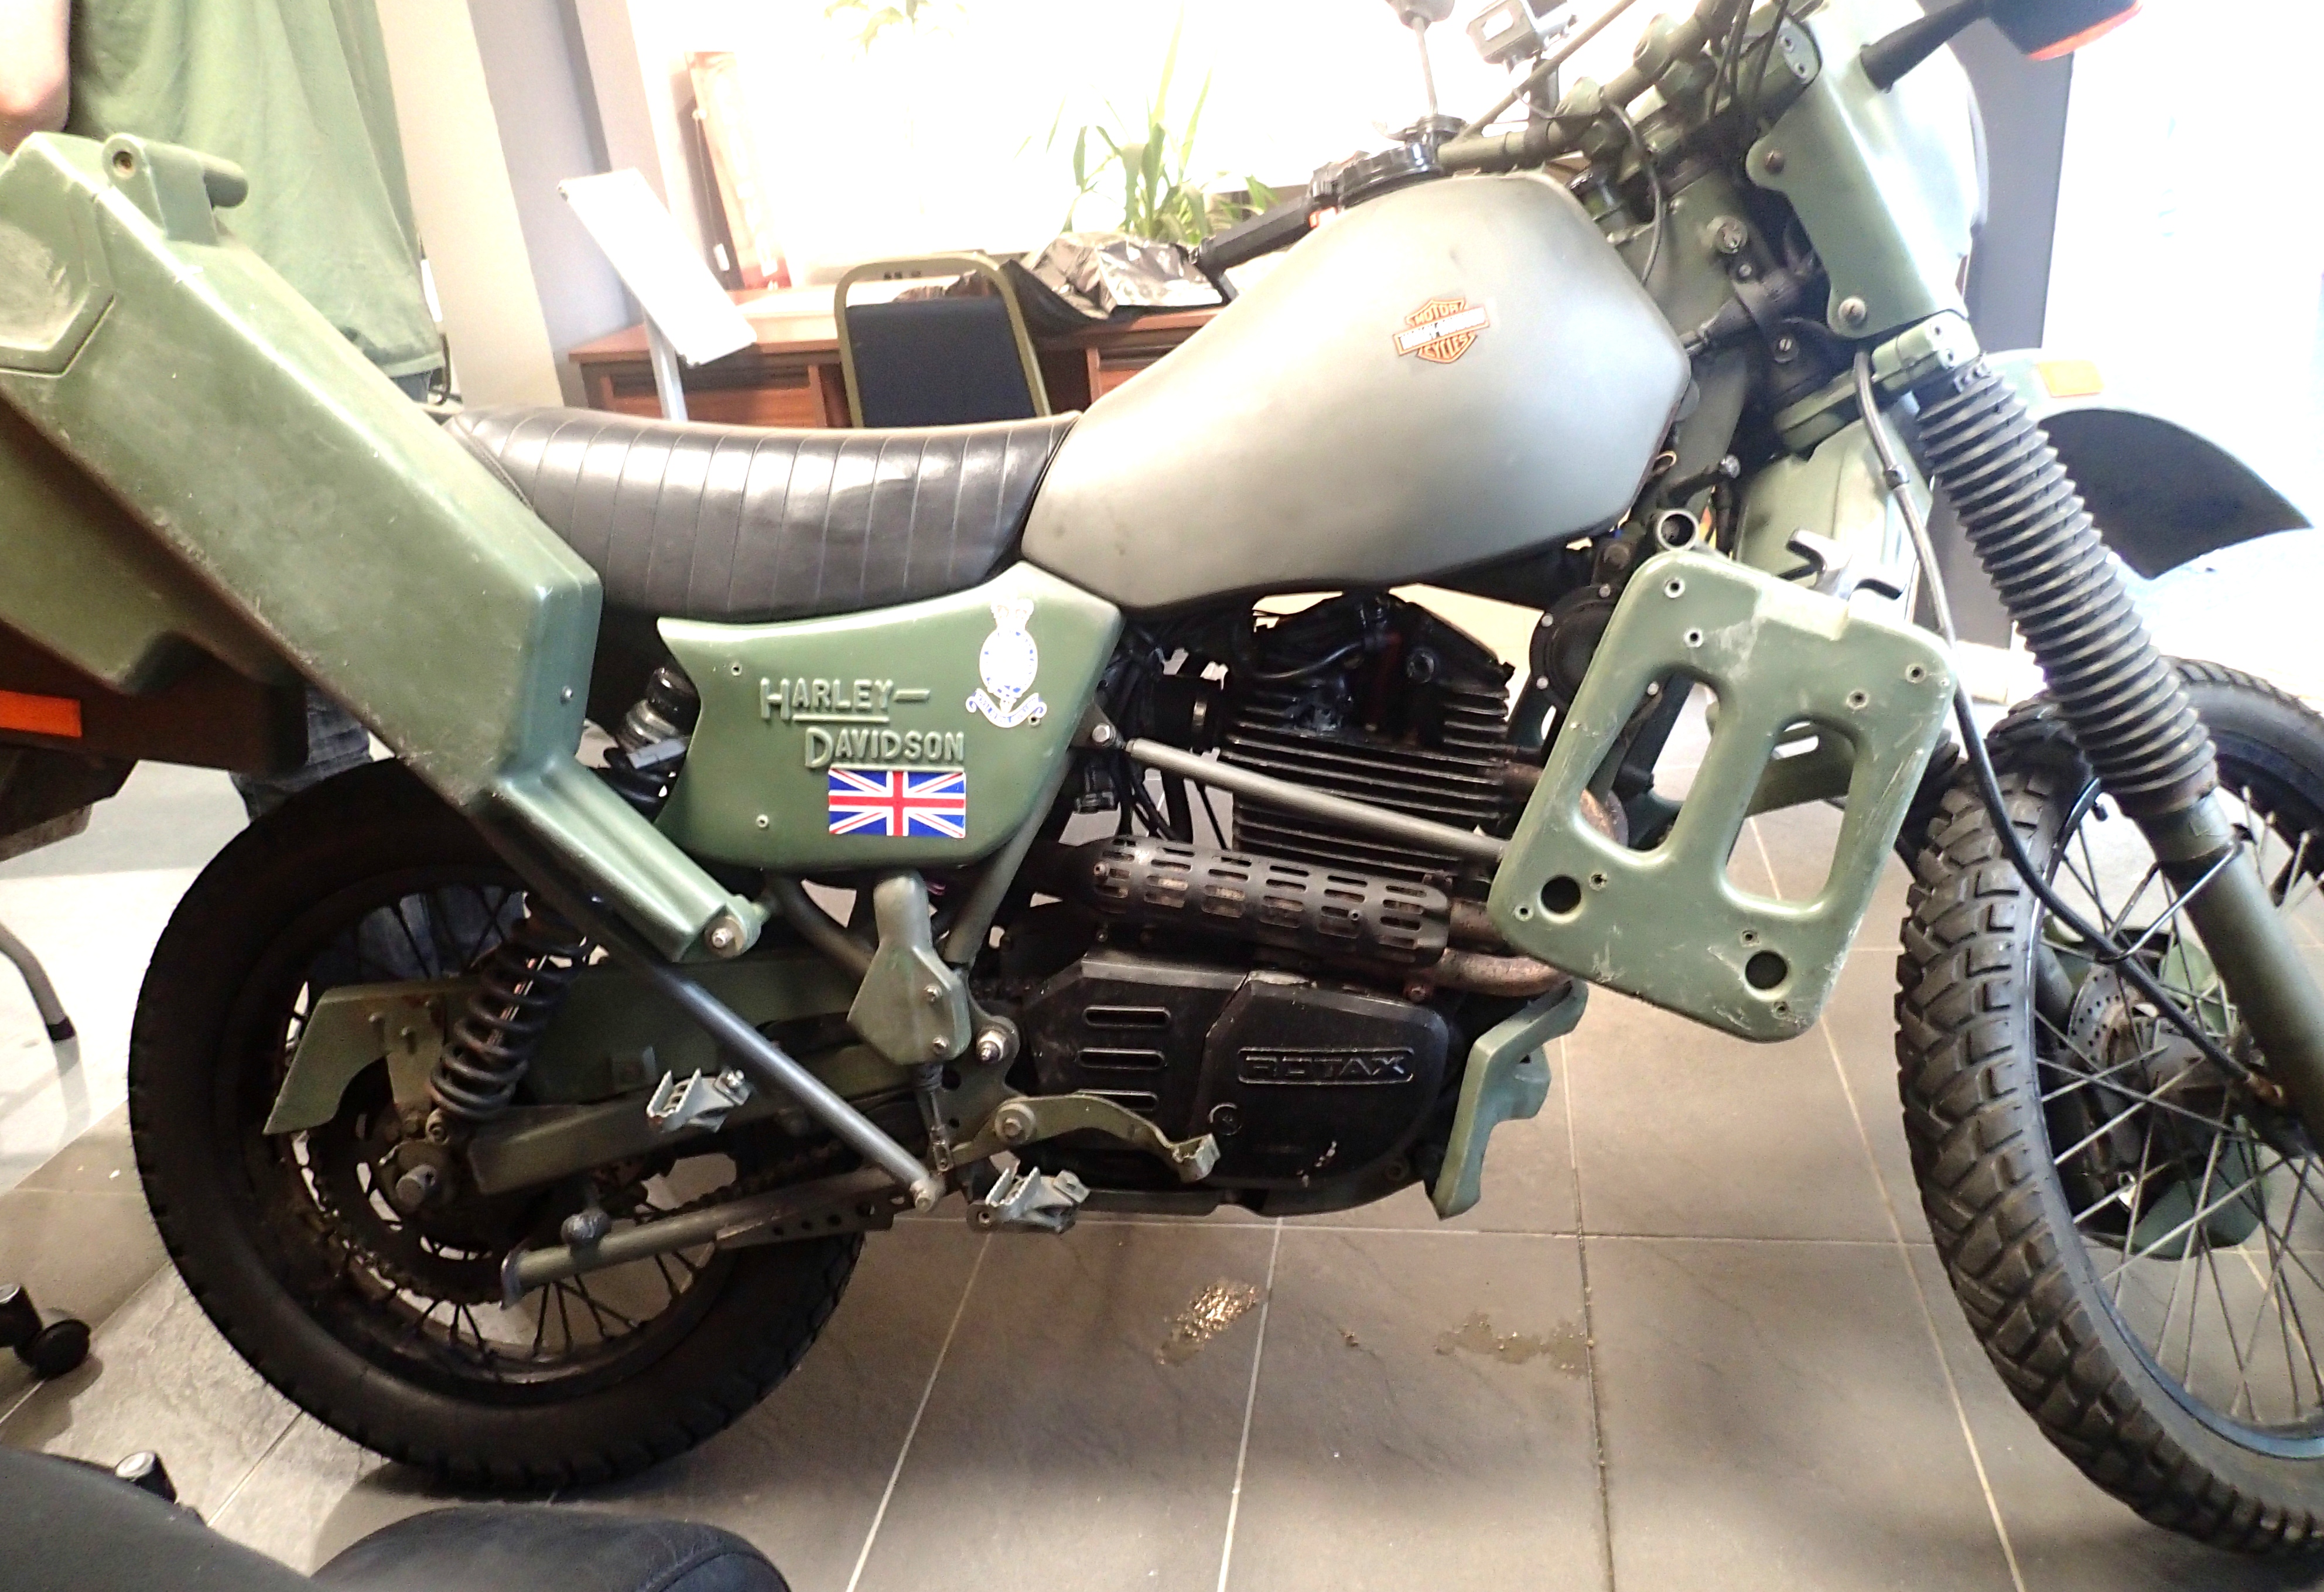 Harley Davidson MT 348CC petrol military motorbike, complete with side compartment for a SA80 and